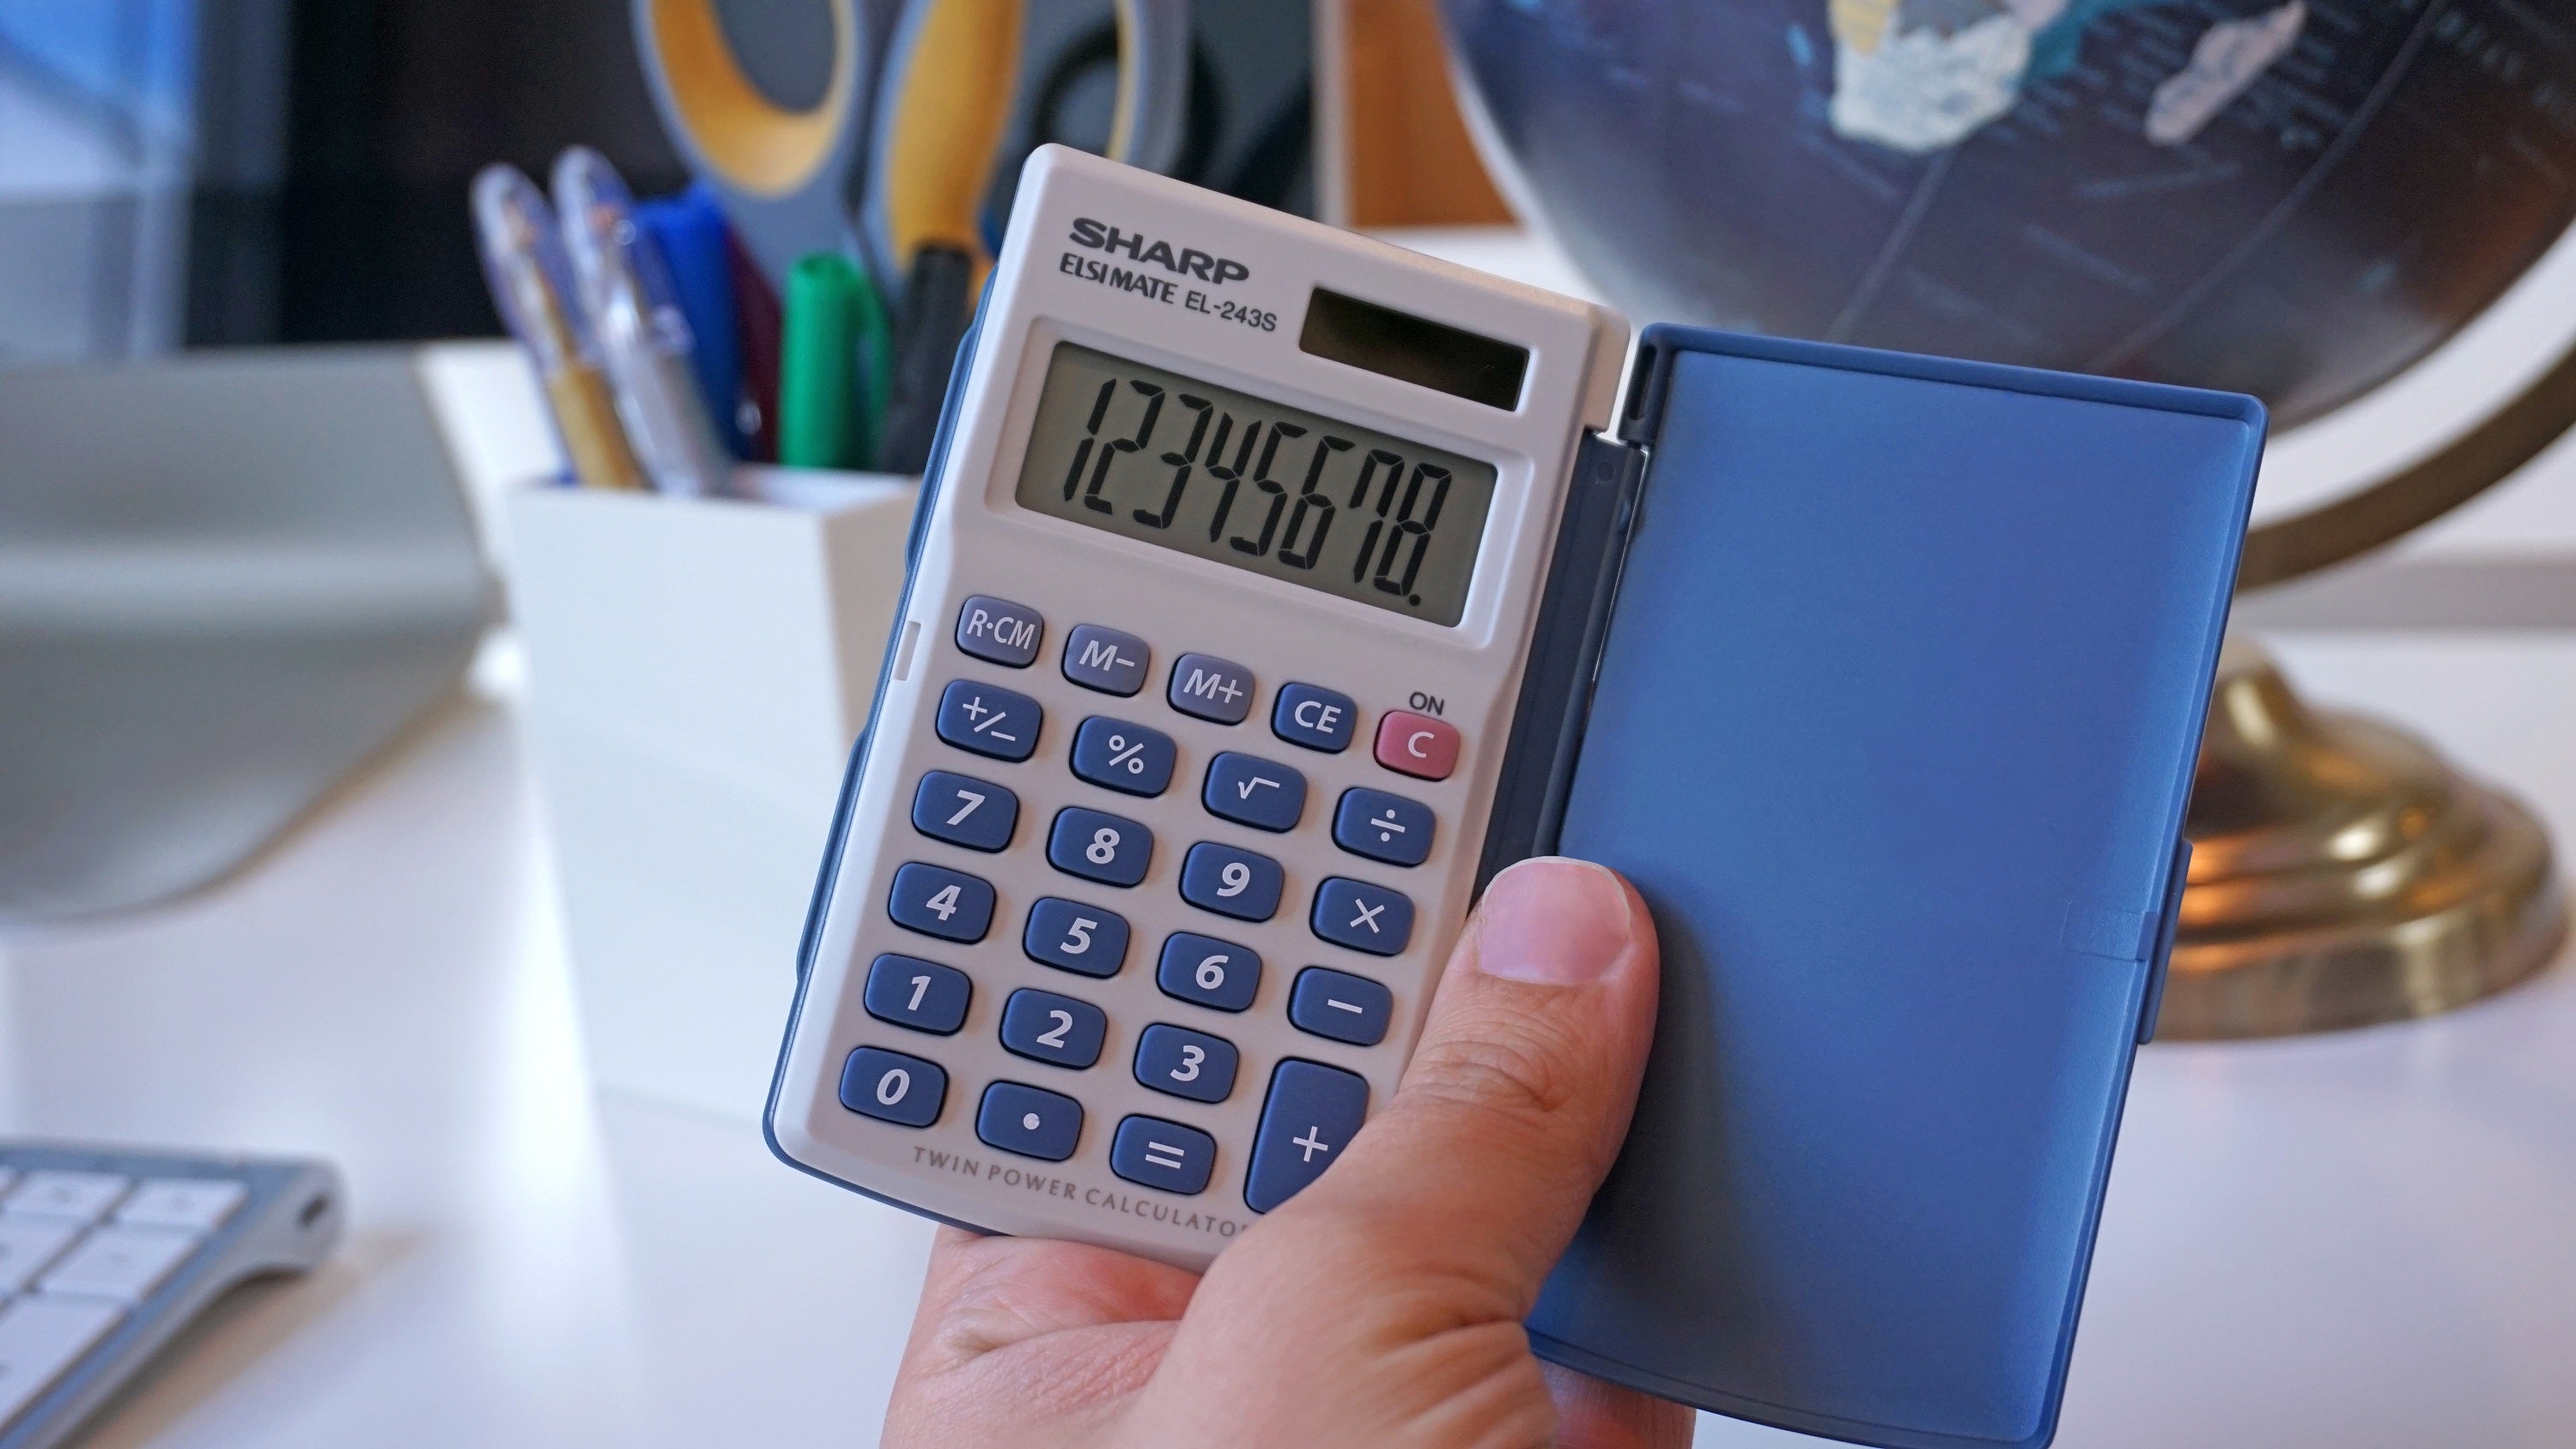 hand holding a white and blue pocket calculator with a hinged case, globe and desktop supplies visible in the background